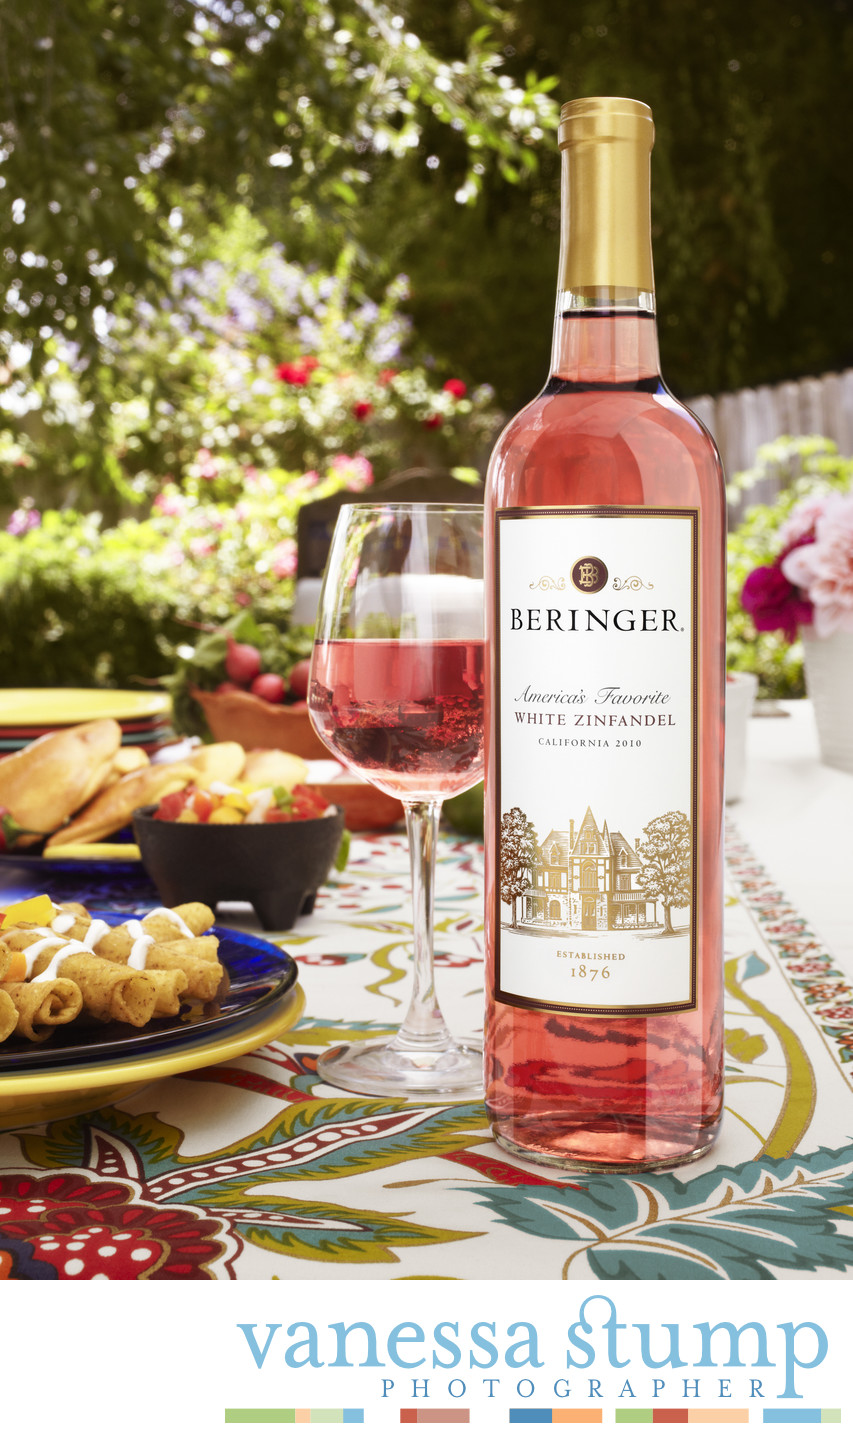 Environmental product photography for Beringer White Zinfandel in a back garden.